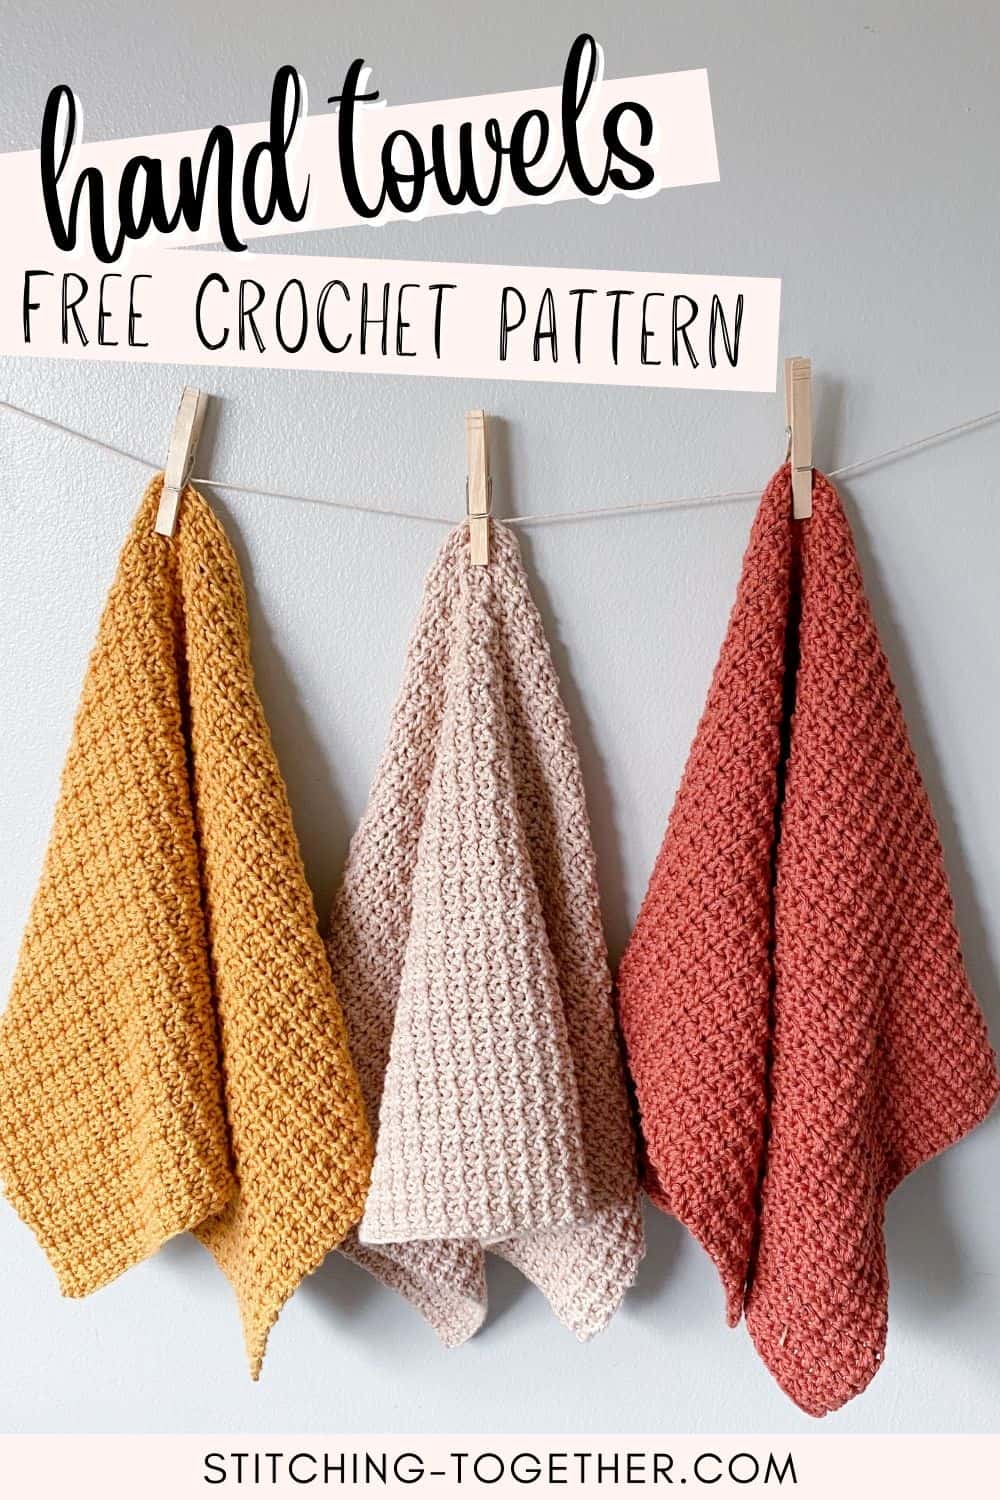 pin of three crochet hand towels hanging from clothes pins with text reading "hand towels free crochet pattern"